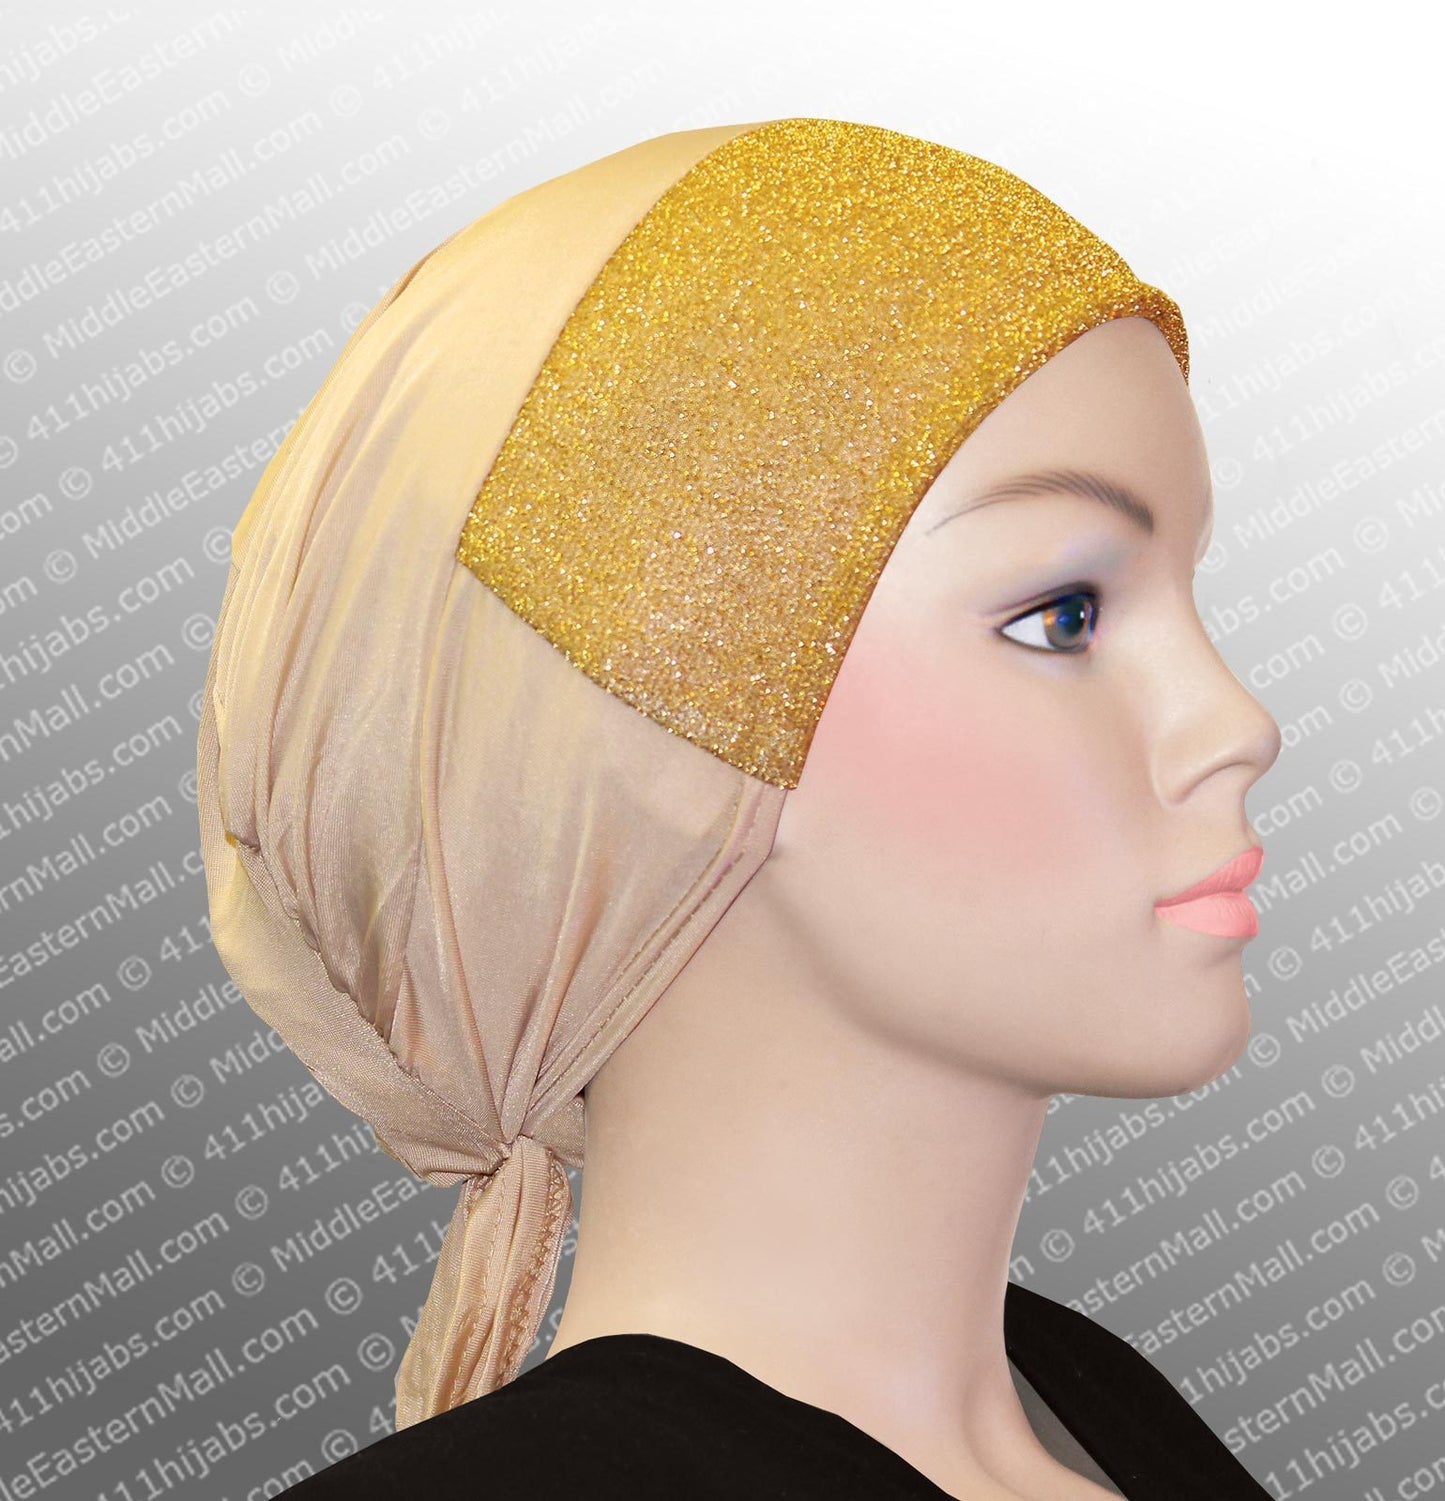 Wholesale Sparkle Hijab Caps with Ties Muslim Woman head accessories CLOSEOUT CLEARANCE